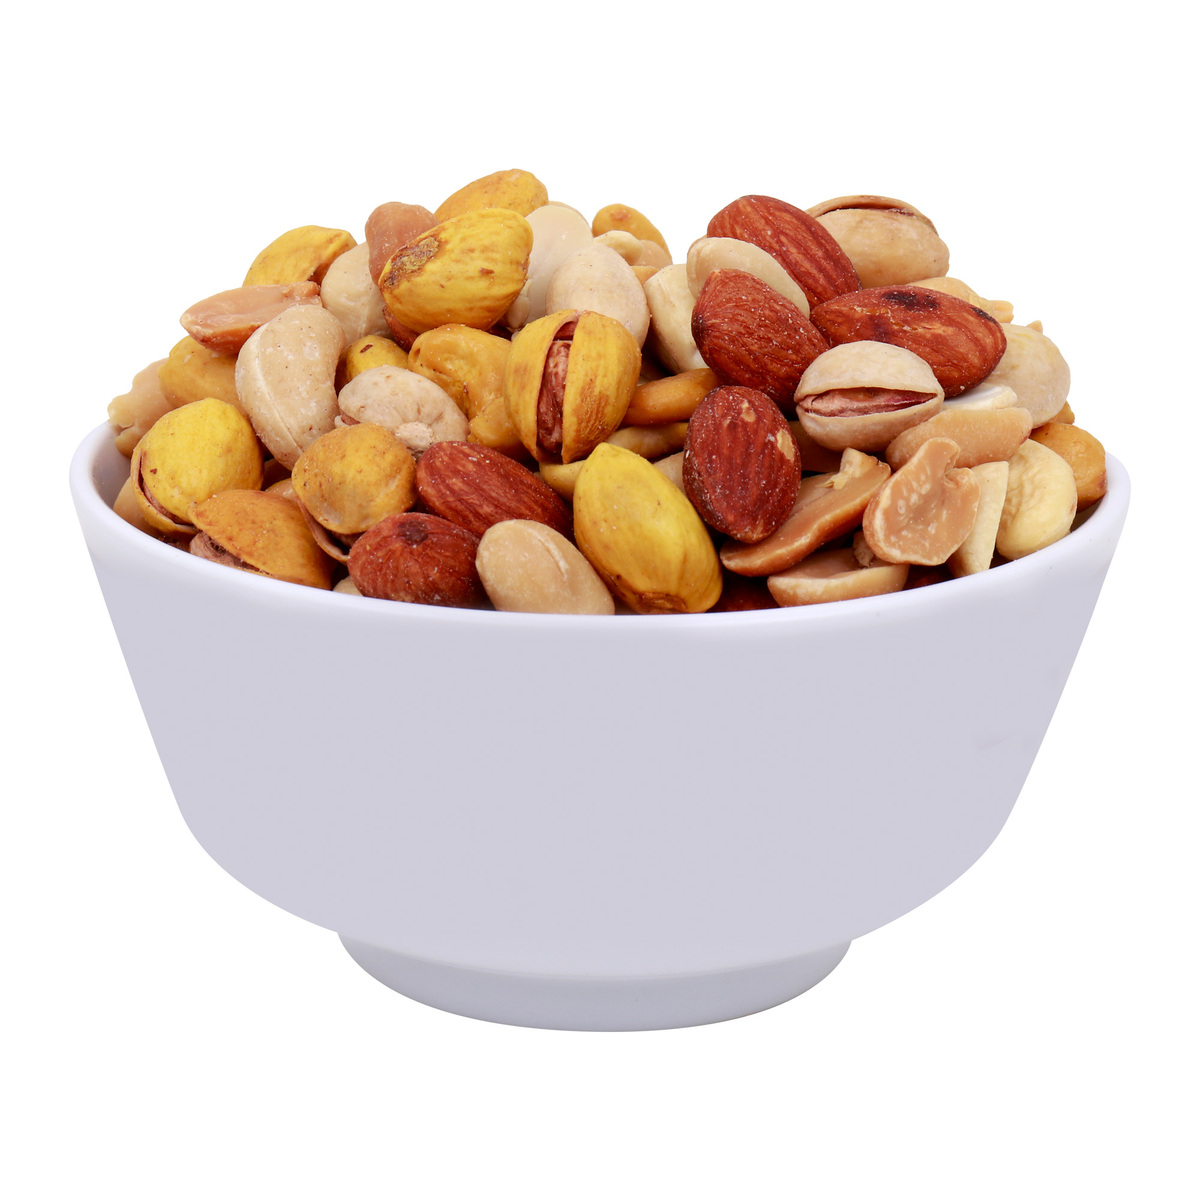 Mix Nuts 500 g